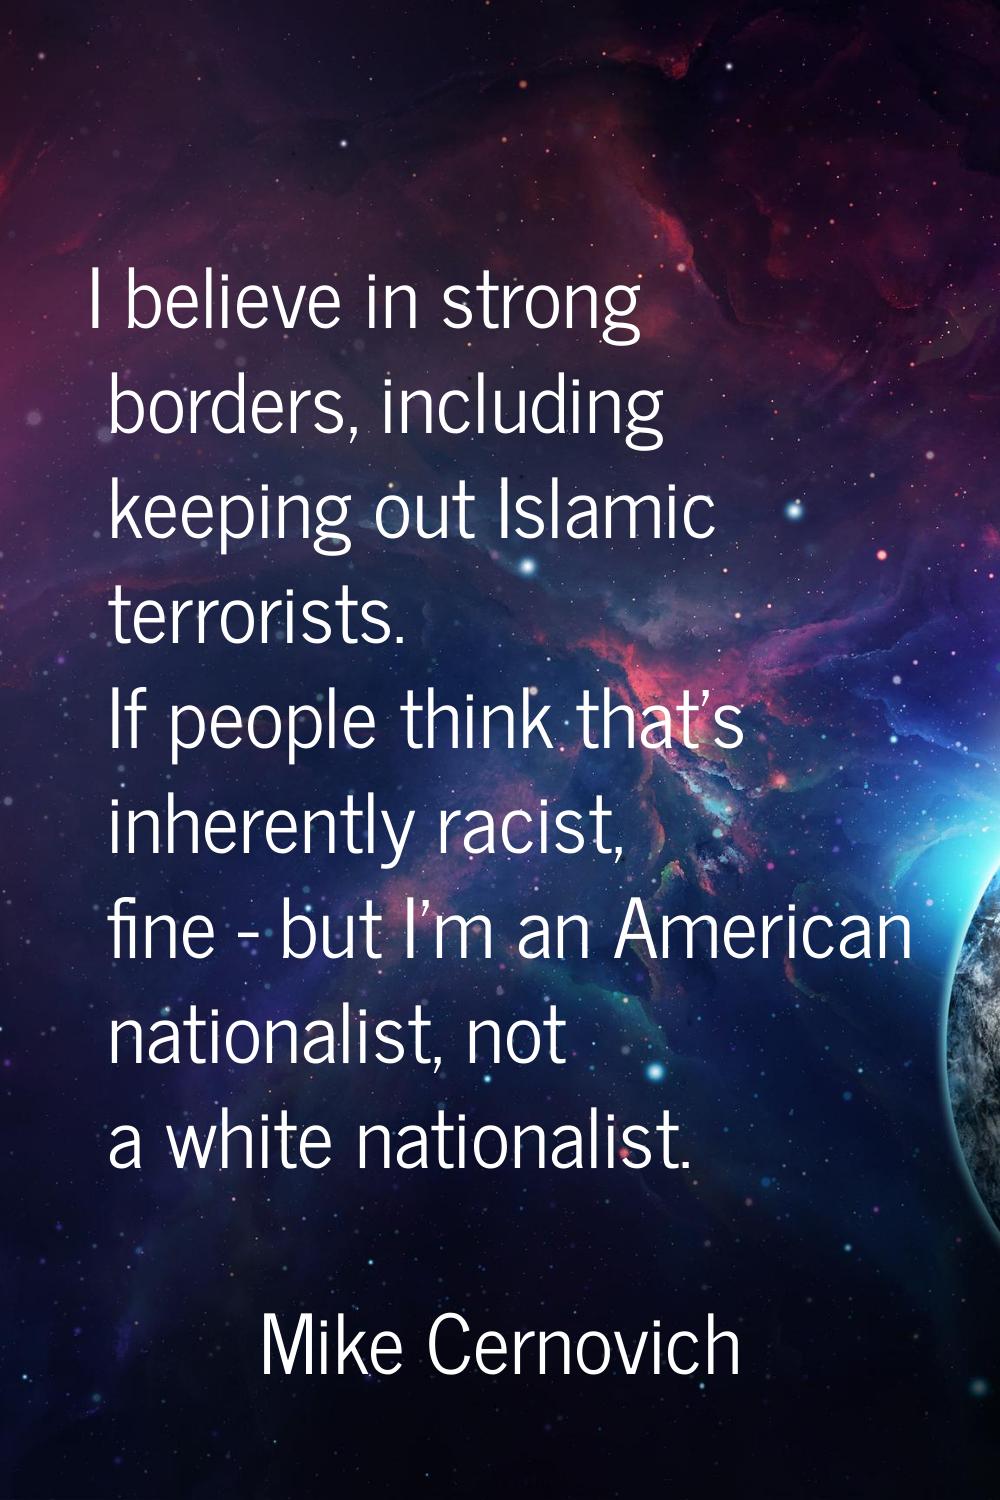 I believe in strong borders, including keeping out Islamic terrorists. If people think that's inher